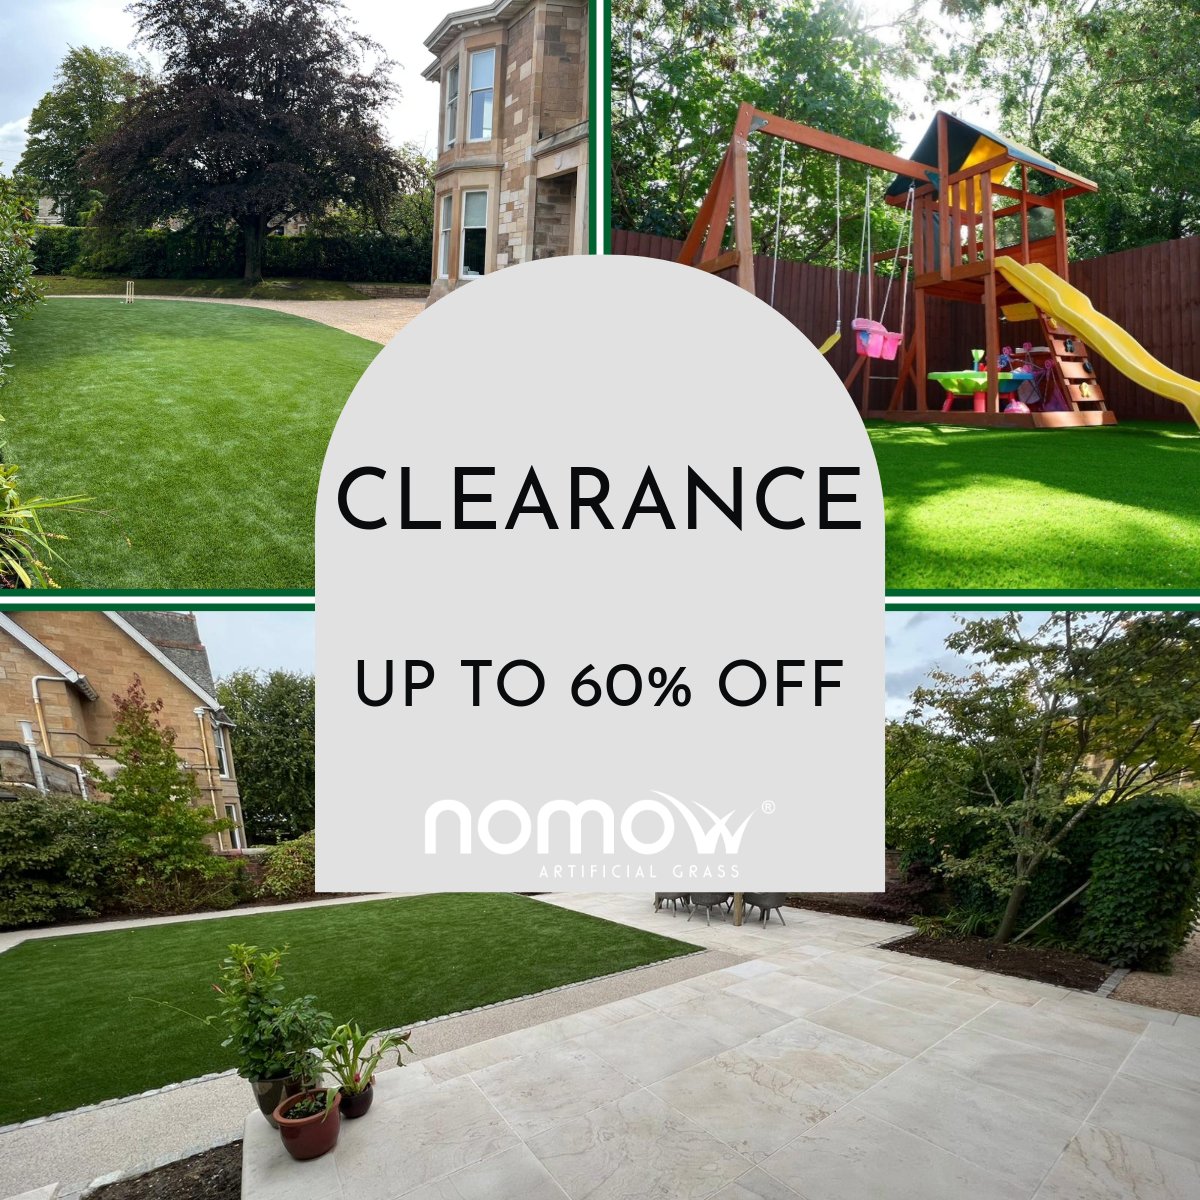 🚨 Shop clearance rolls on Nomow today 🚨

Save up to 60% off on our clearance section 🌿

Receive top tier results using Nomow ⭐

Shop today: nomow.co.uk/product-catego… 🤑

 #Nomow #ArtificialGrass #Gardening #save